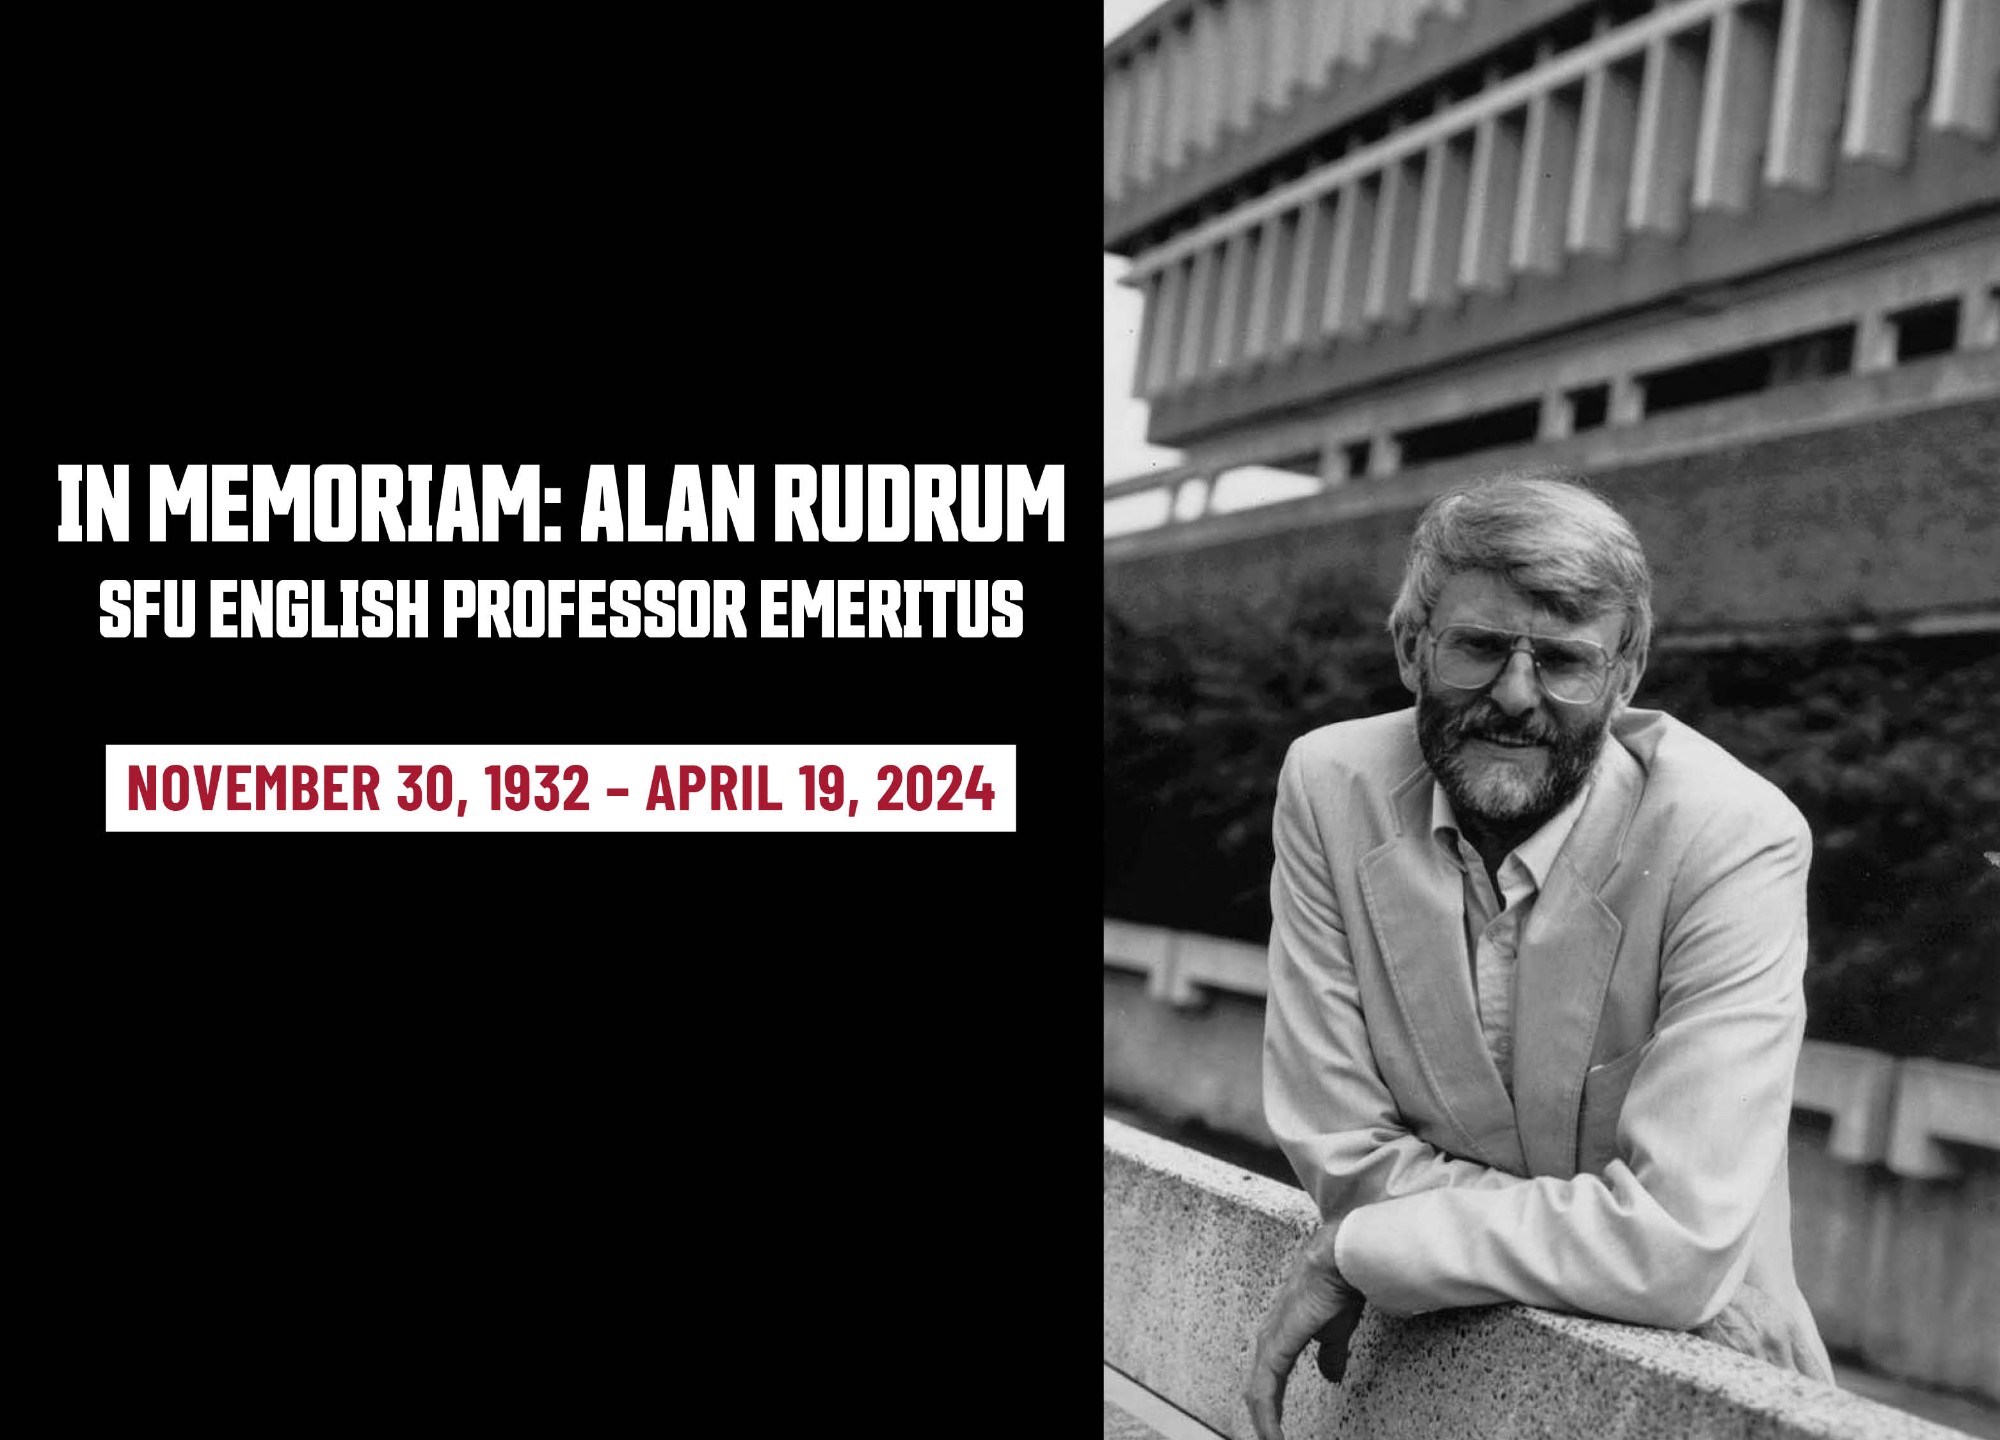 black and white photo of Alan Rudrum and SFU's AQ building in the background